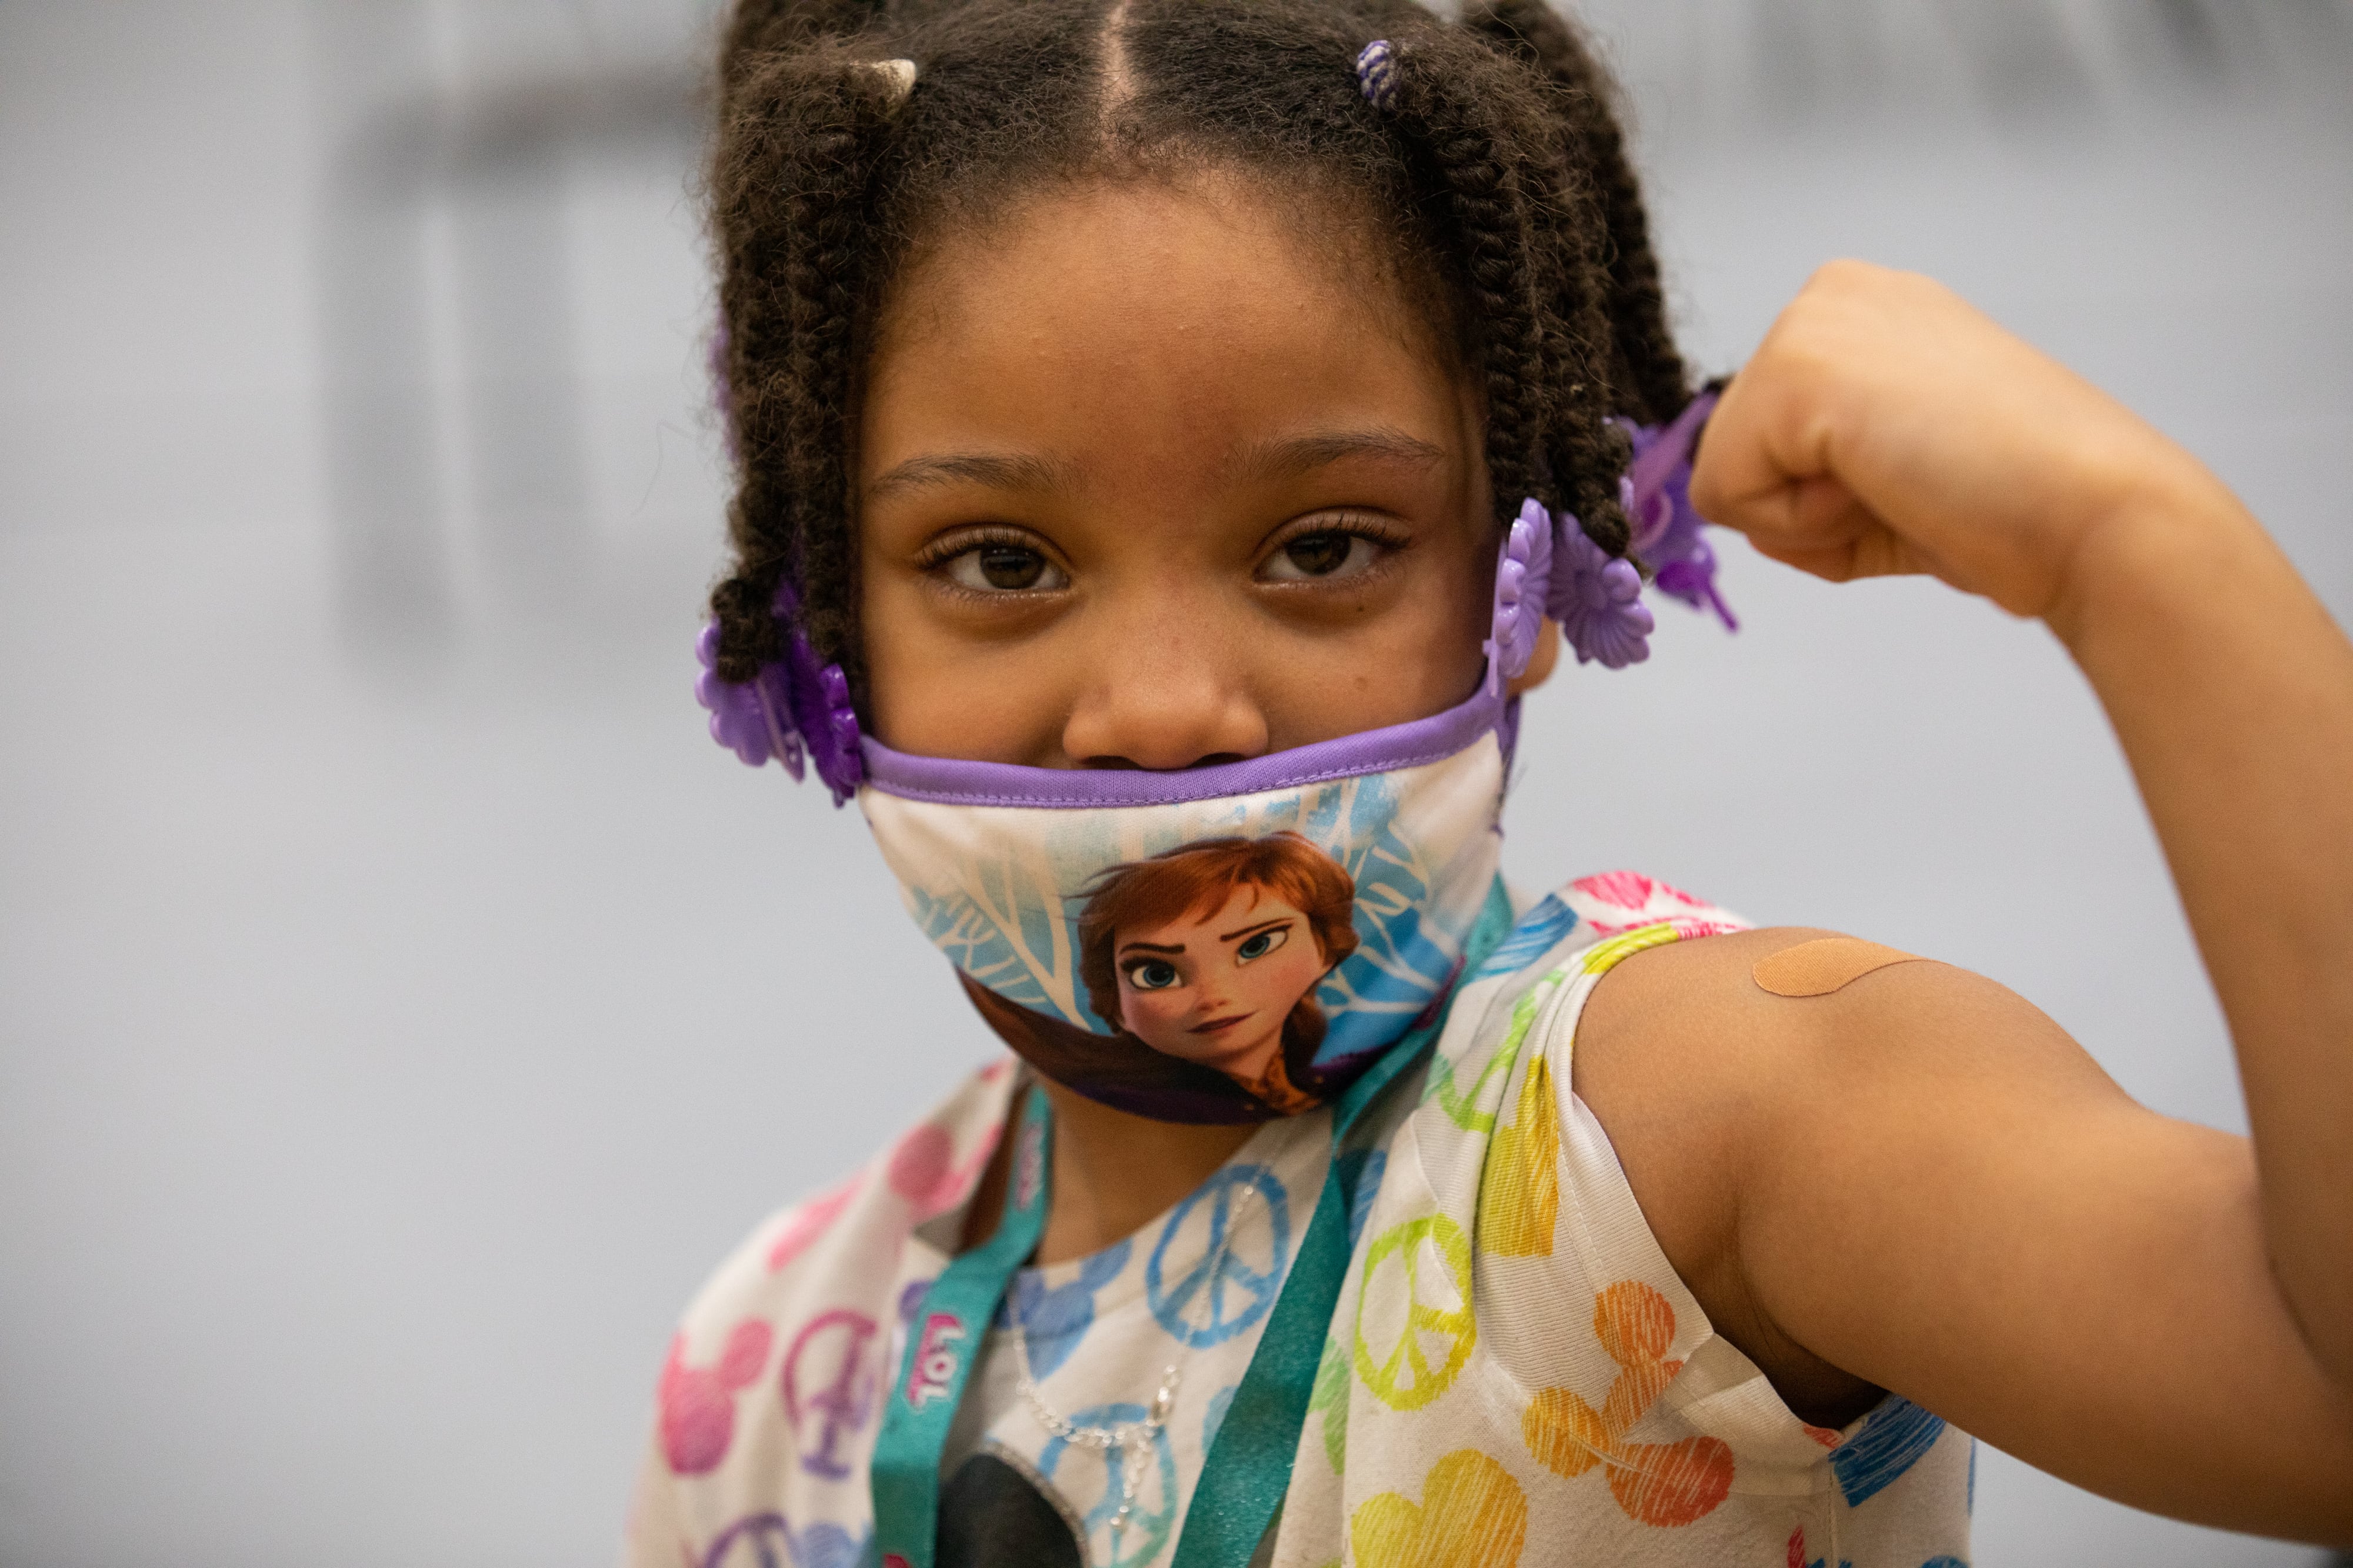 A young girl wearing a mask looks directly at the camera and holds up her arm to show off her bandage after getting a COVID-19 vaccine shot.